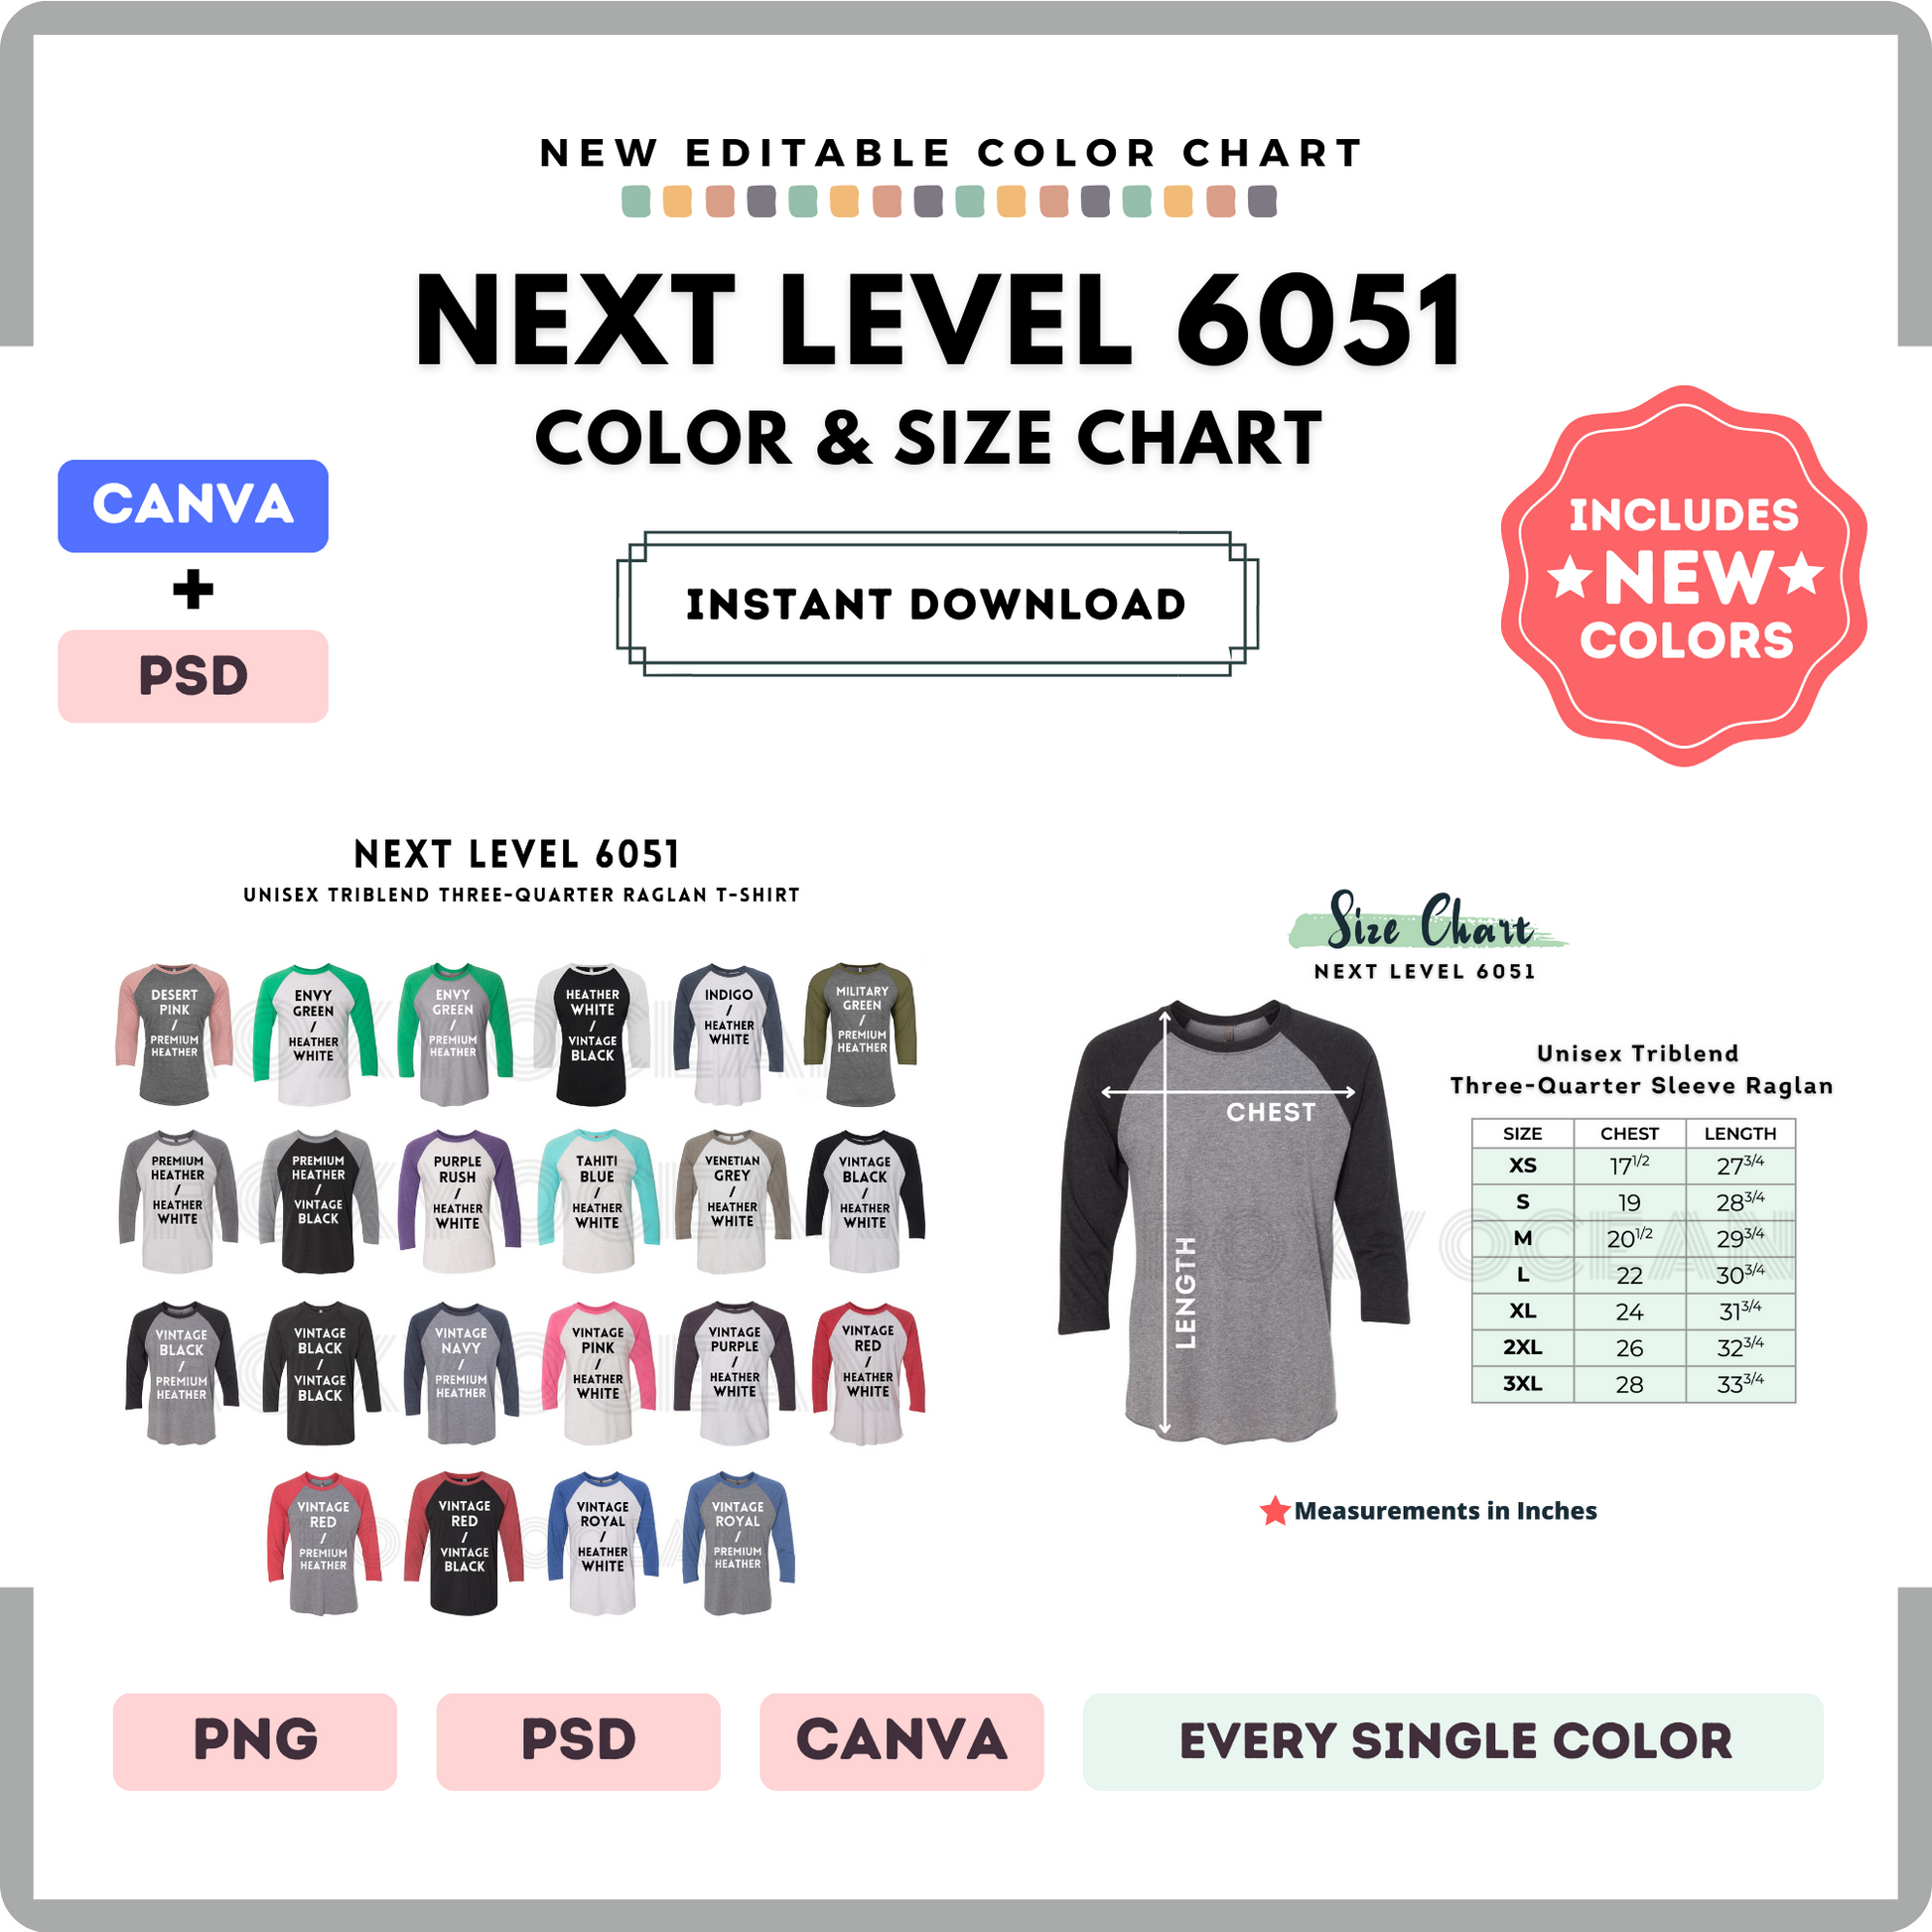 Next Level 6051 Color and Size Chart